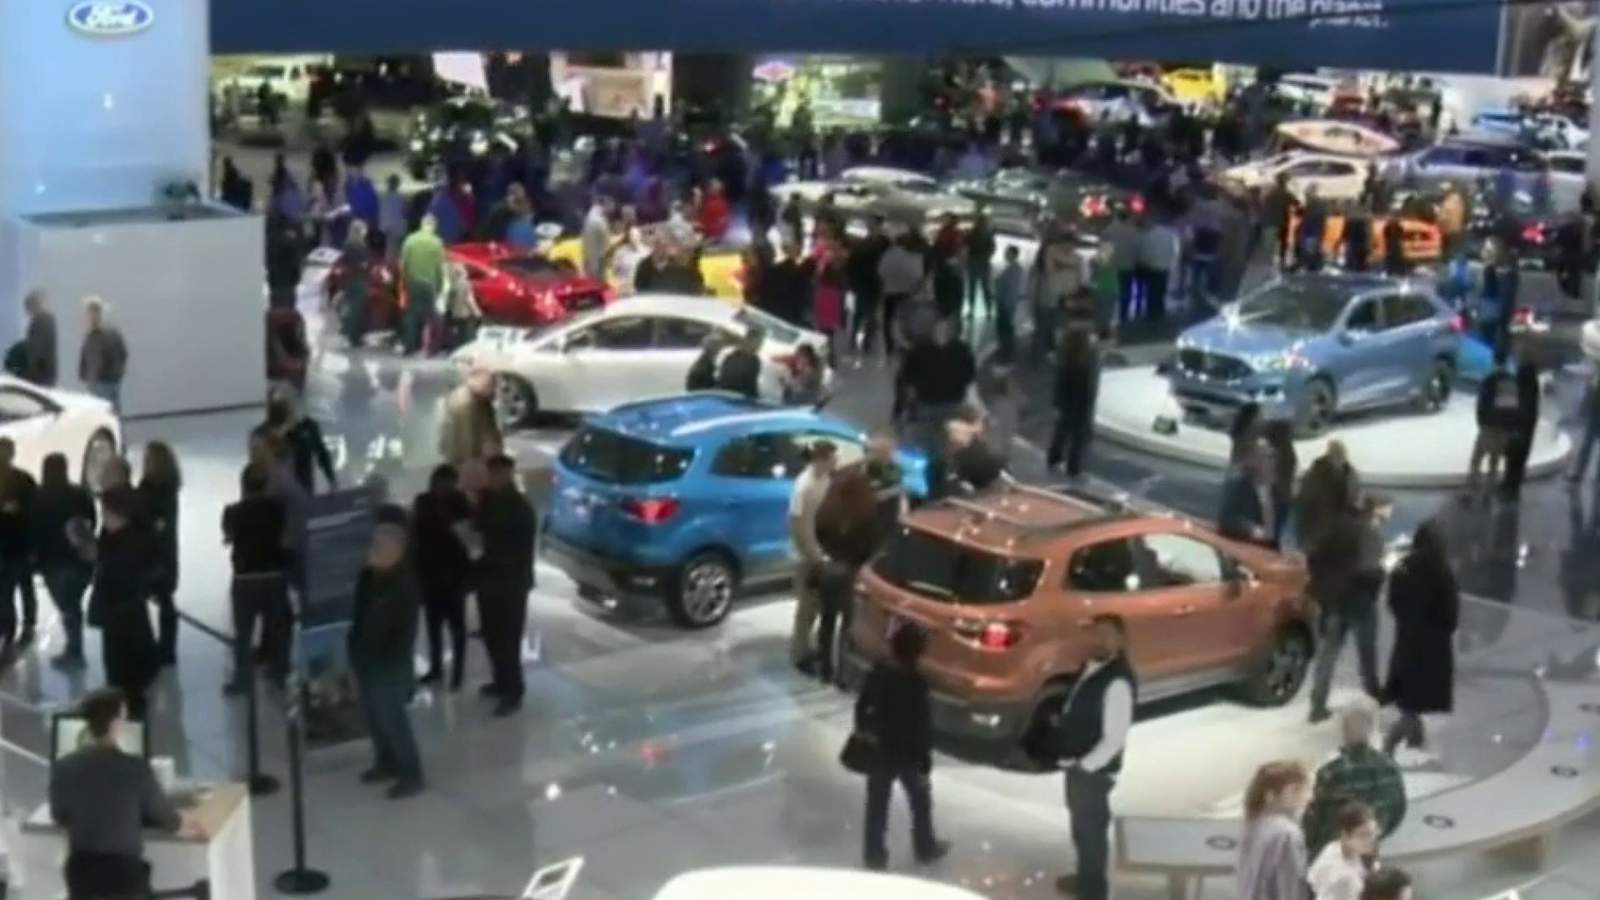 Consumer Electronics Show in Las Vegas goes virtual -- Could this boost Detroits auto show?